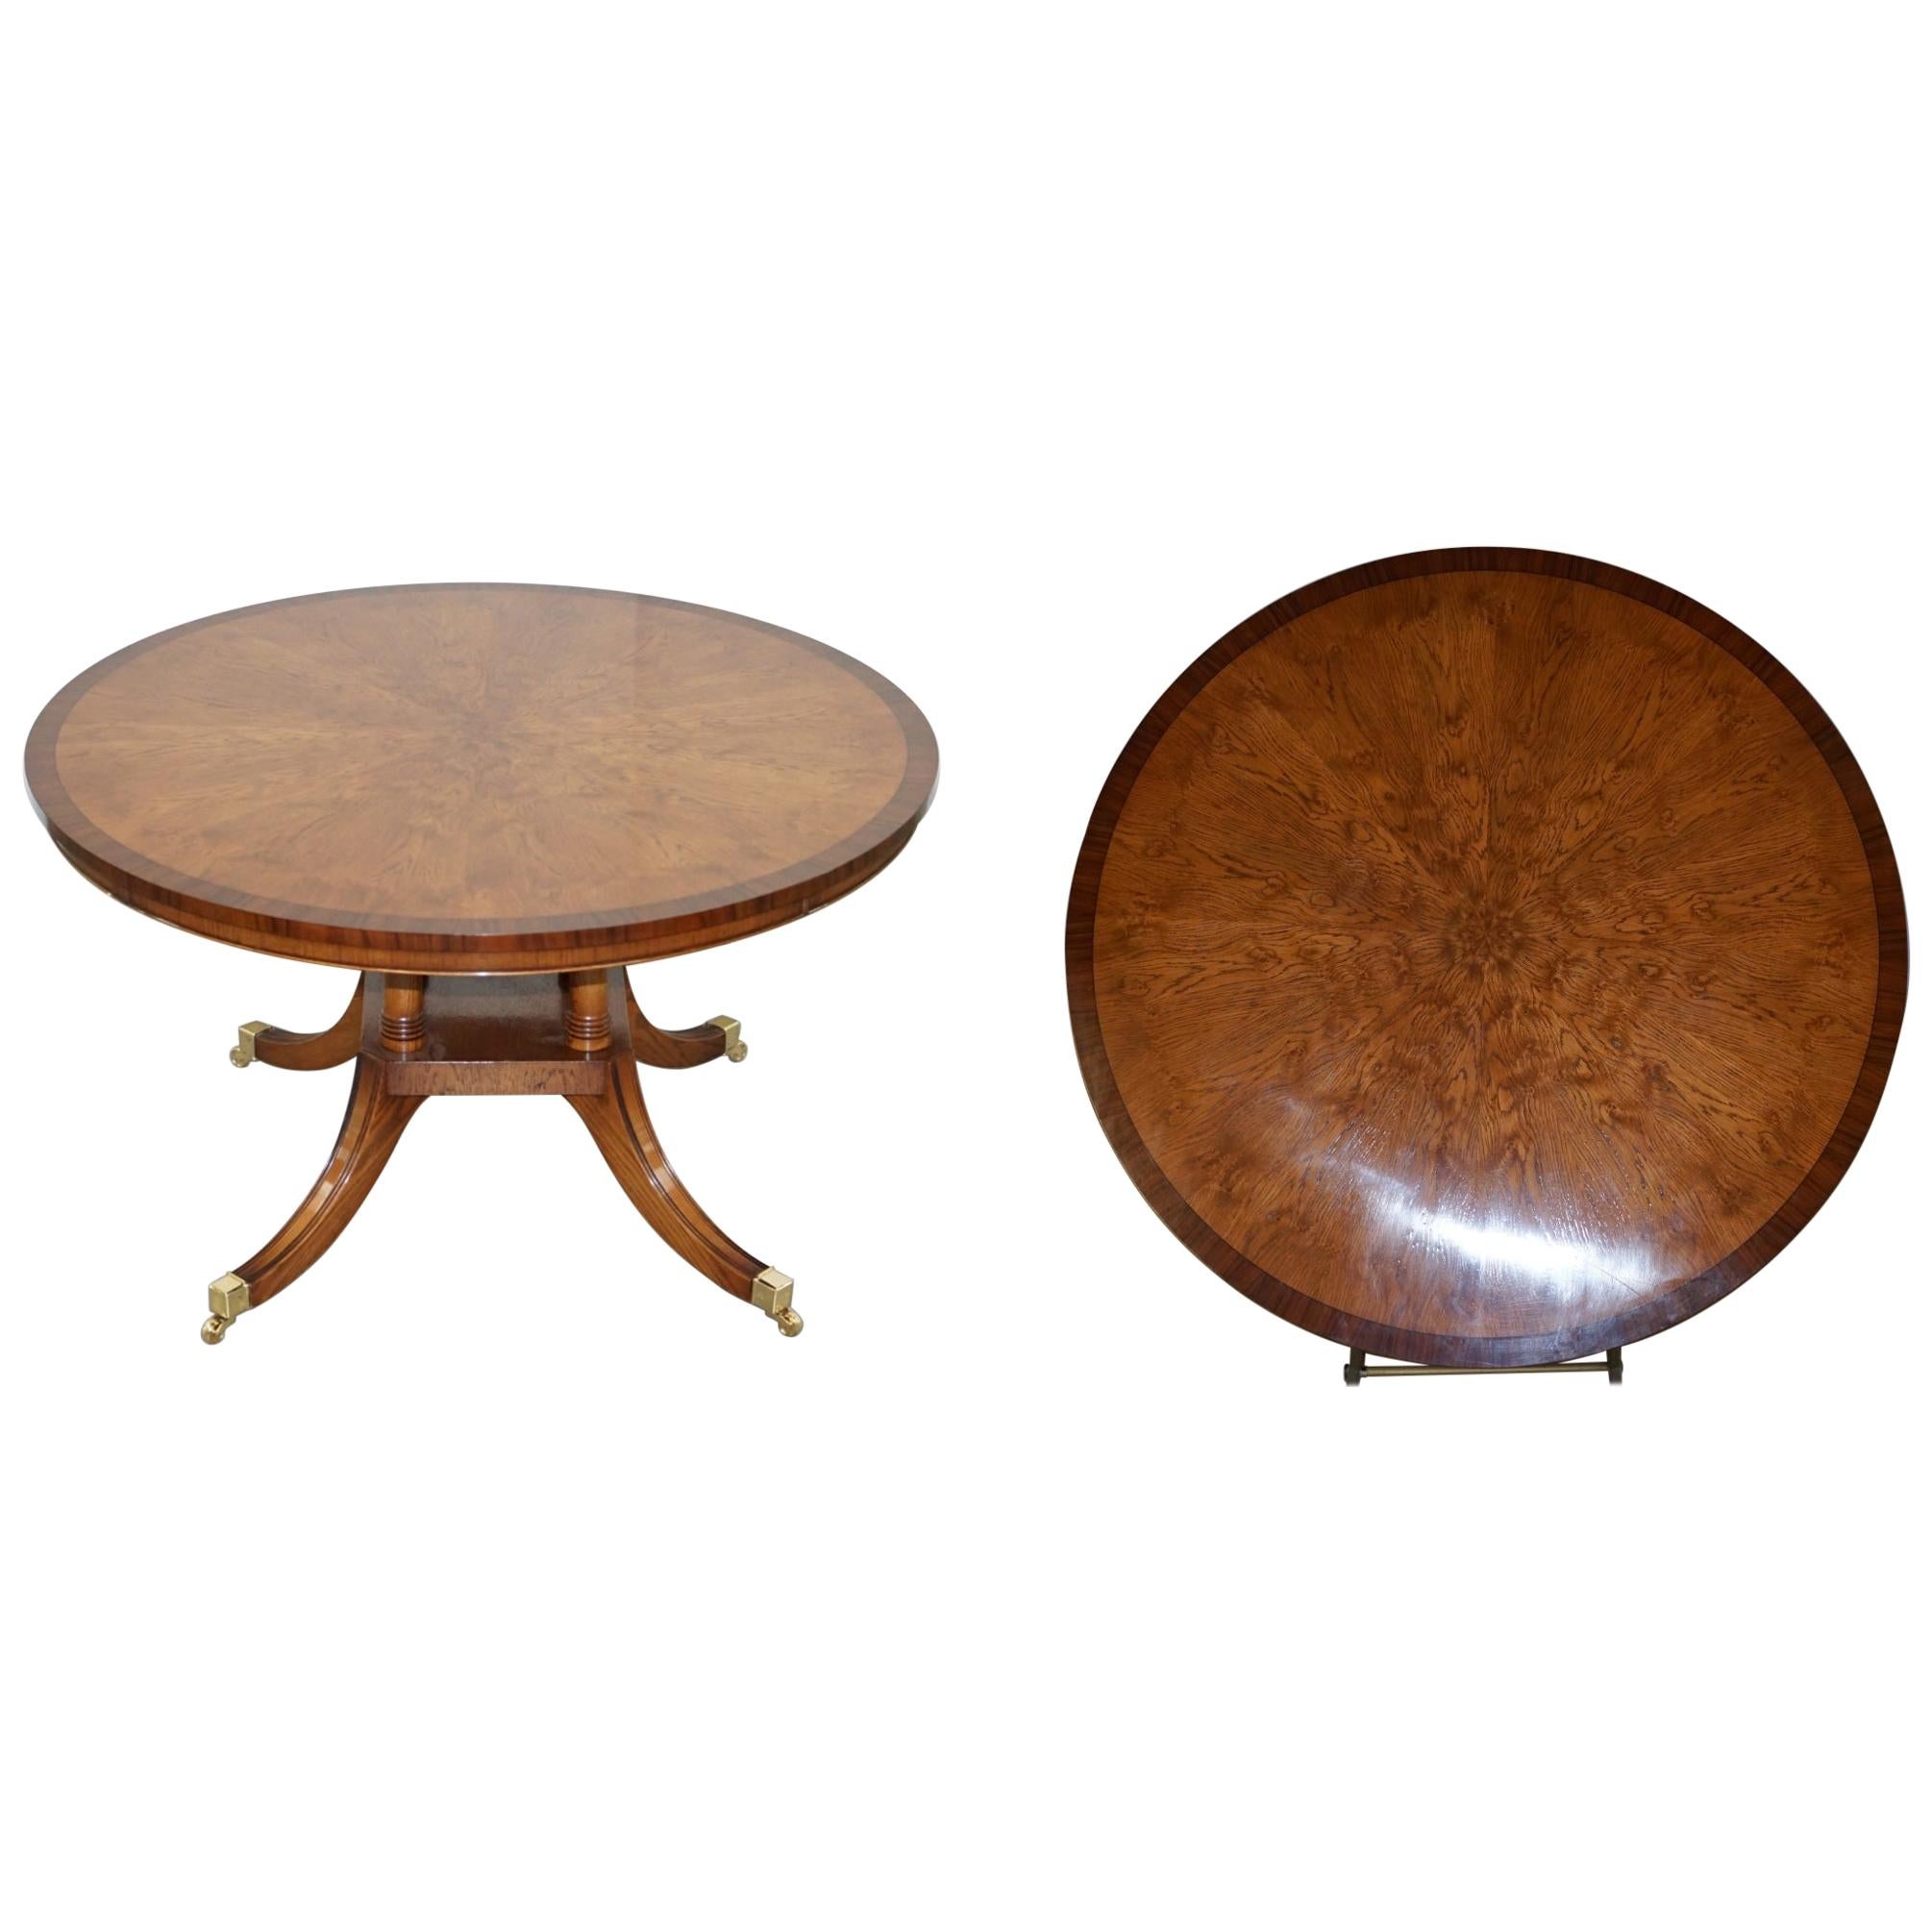 Brand New Cluster Pollard Oak Round Dining Tables Seats Four to Six People For Sale